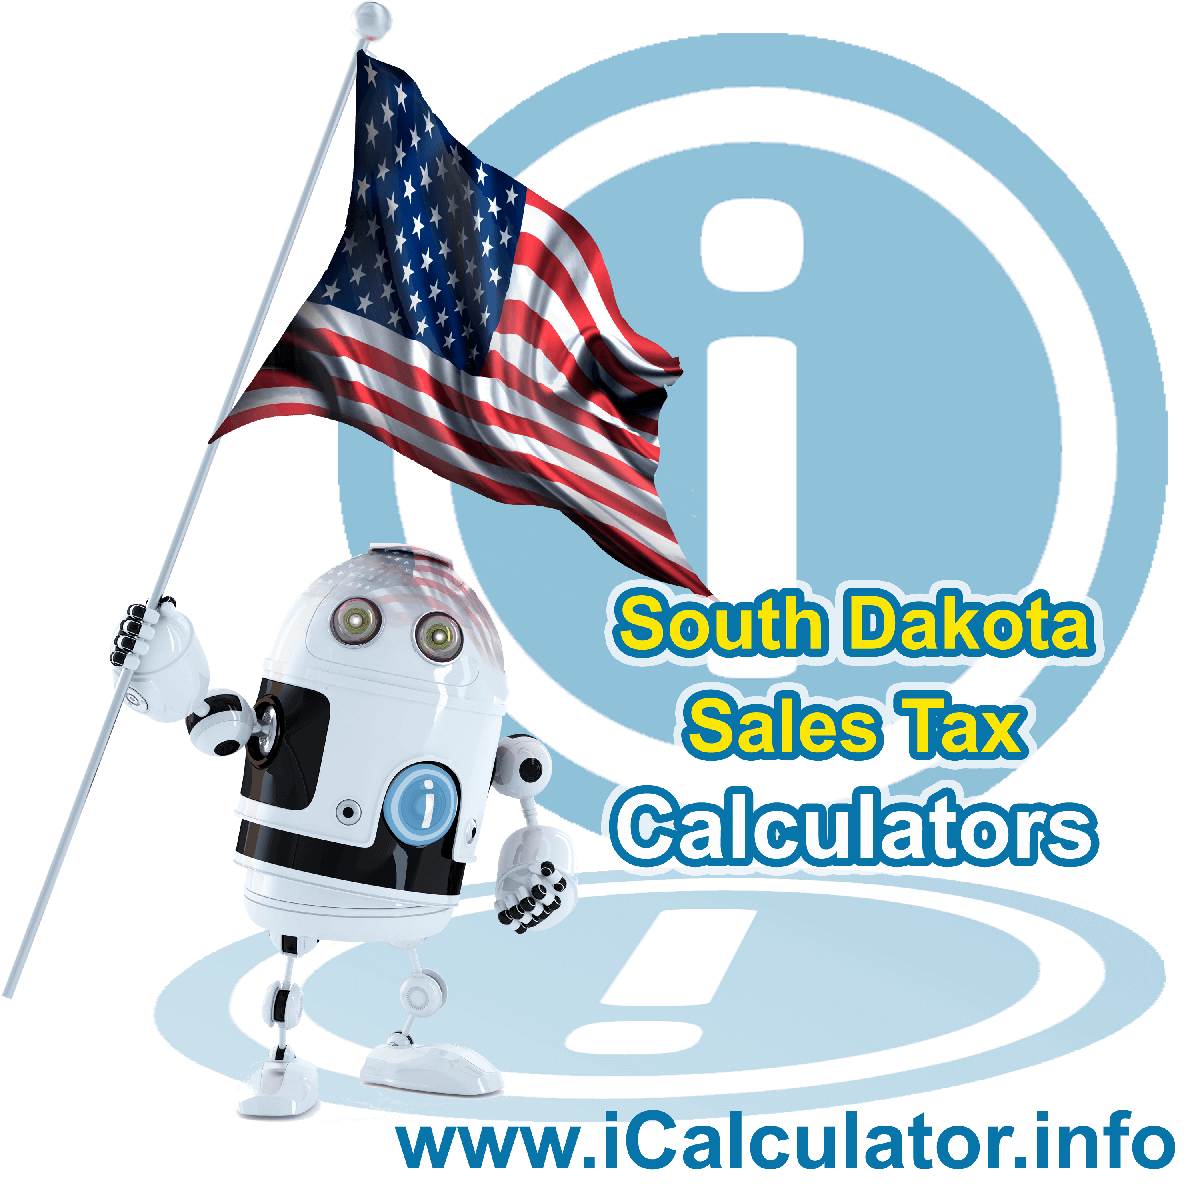 Spearfish Sales Rates: This image illustrates a calculator robot calculating Spearfish sales tax manually using the Spearfish Sales Tax Formula. You can use this information to calculate Spearfish Sales Tax manually or use the Spearfish Sales Tax Calculator to calculate sales tax online.